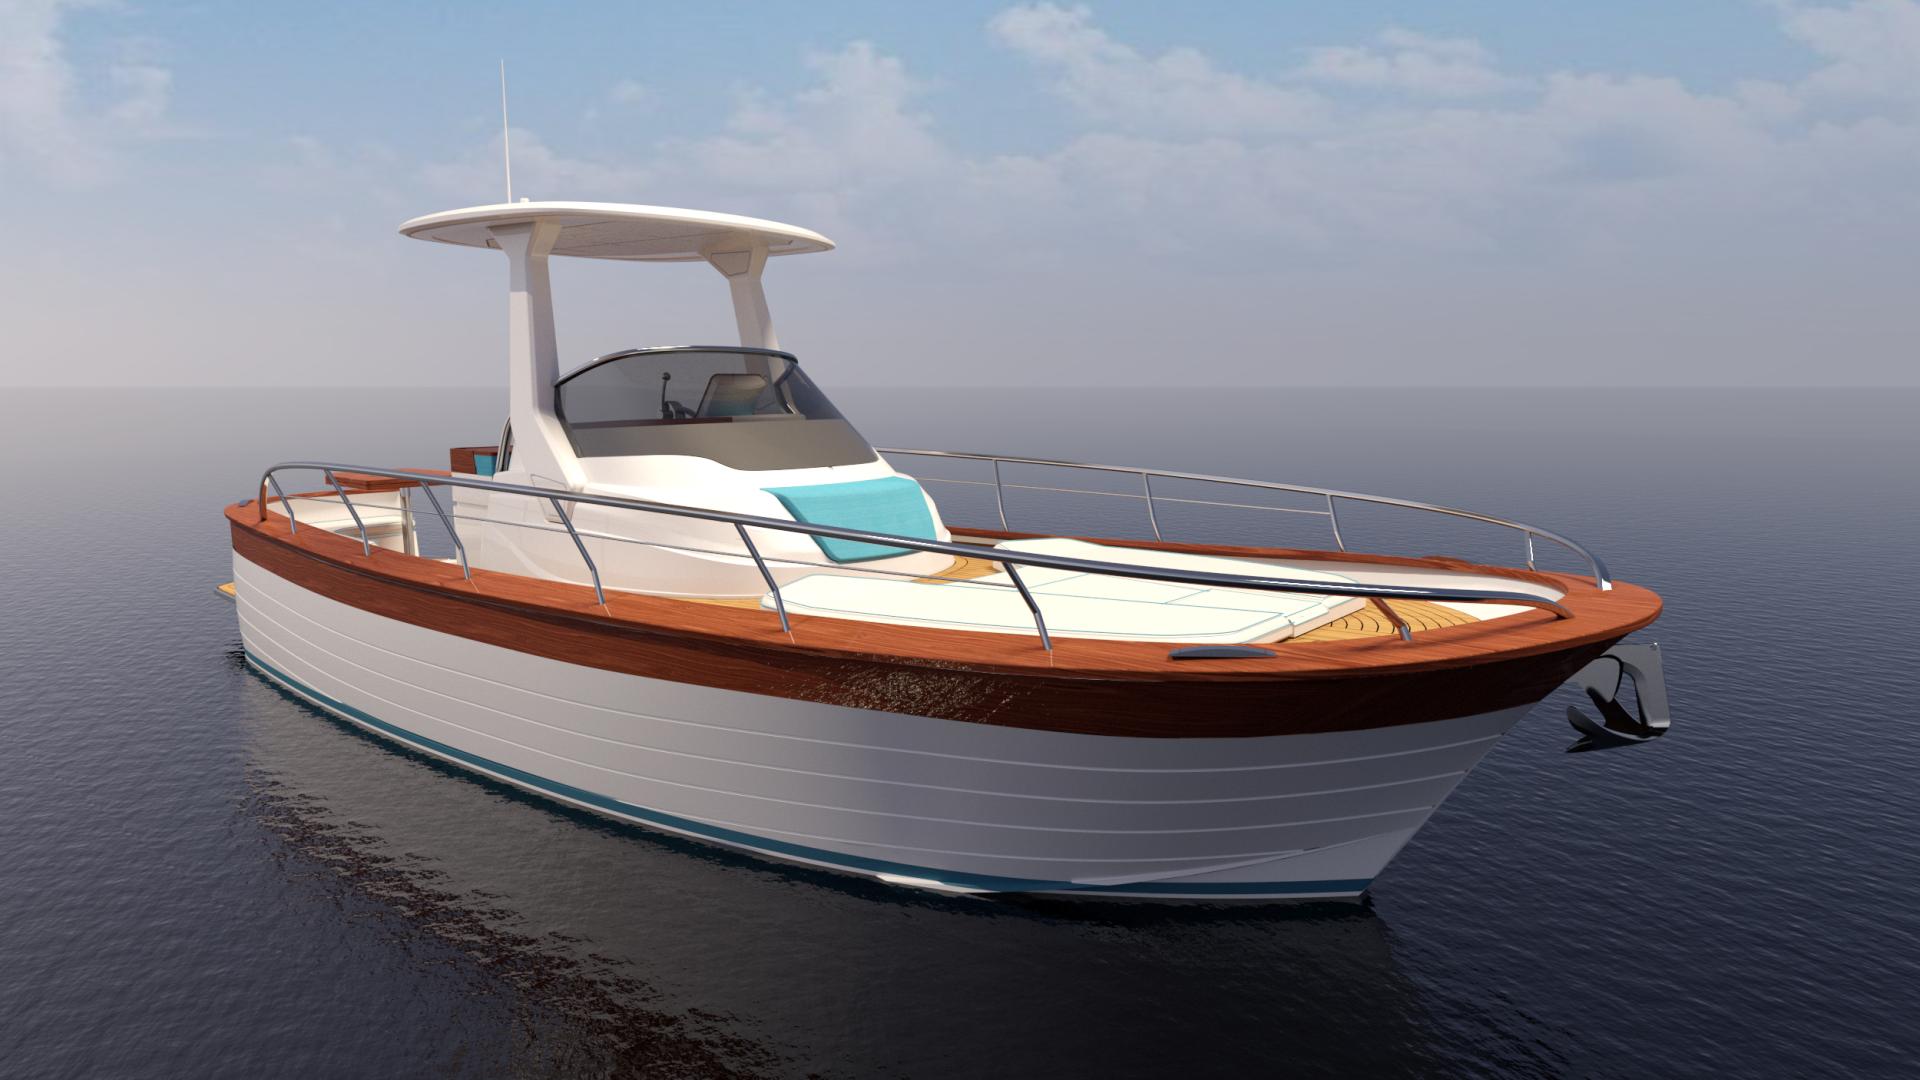 Gozzi Mimì is working at full speed to launch the Libeccio 8.5 Walkaround